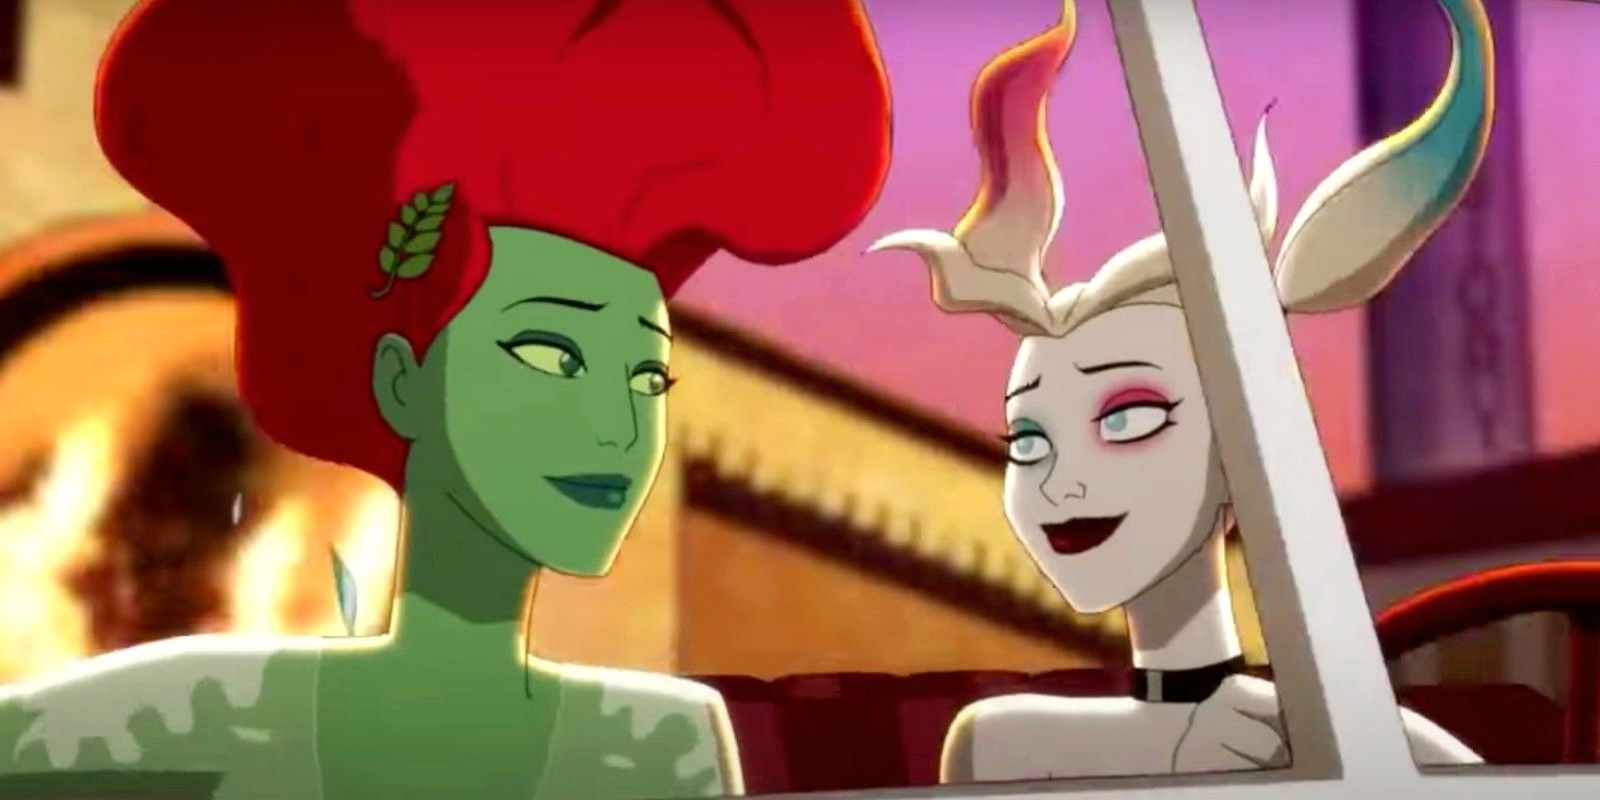 poison ivy and harley quinn on a ride together